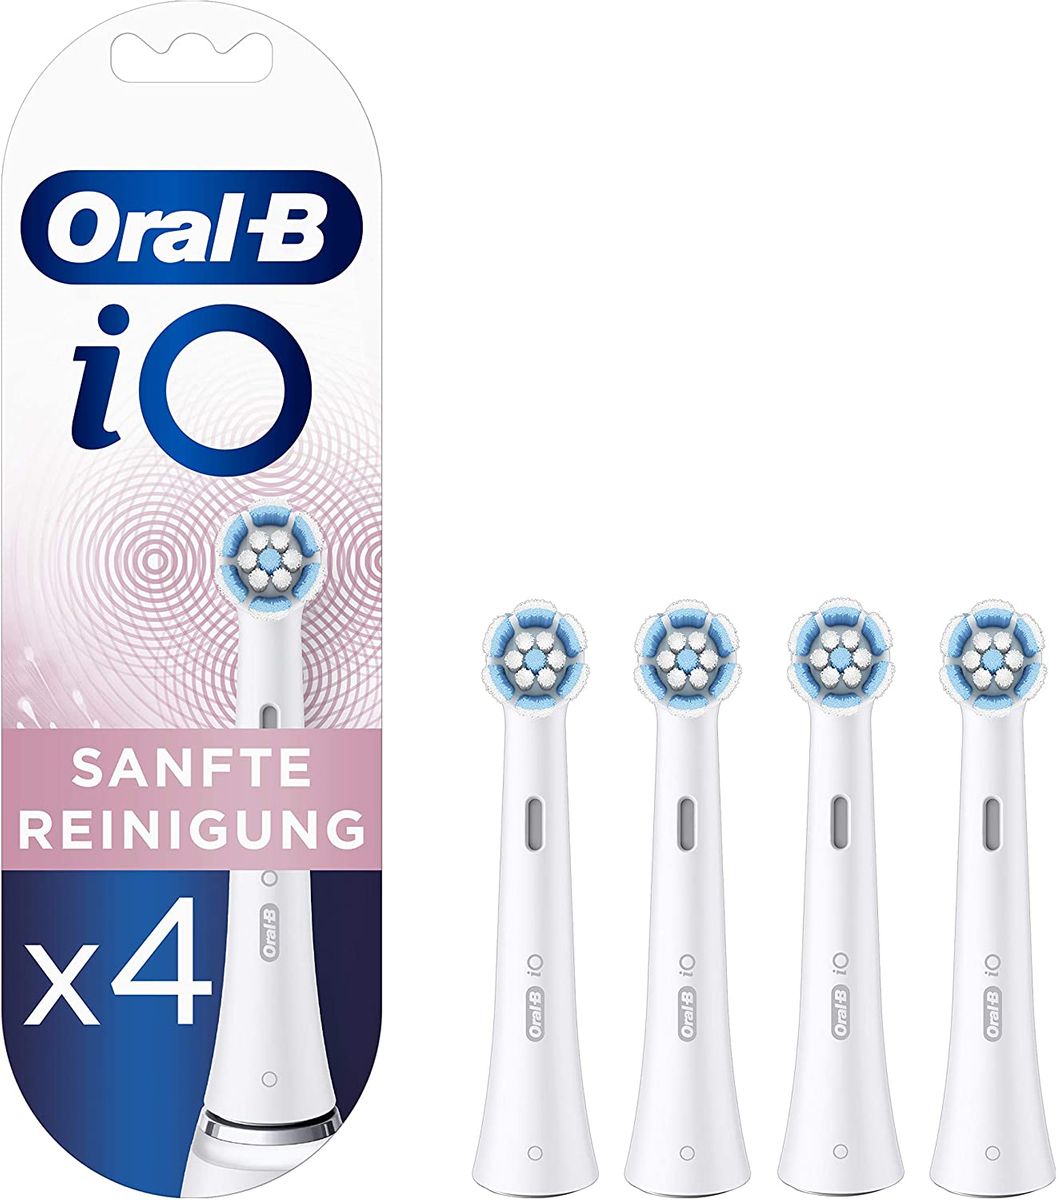 Oral-B iO Gentle Cleaning Attachable brushes for a sensational mouthfeel, letterboxable packaging, 4 pcs.